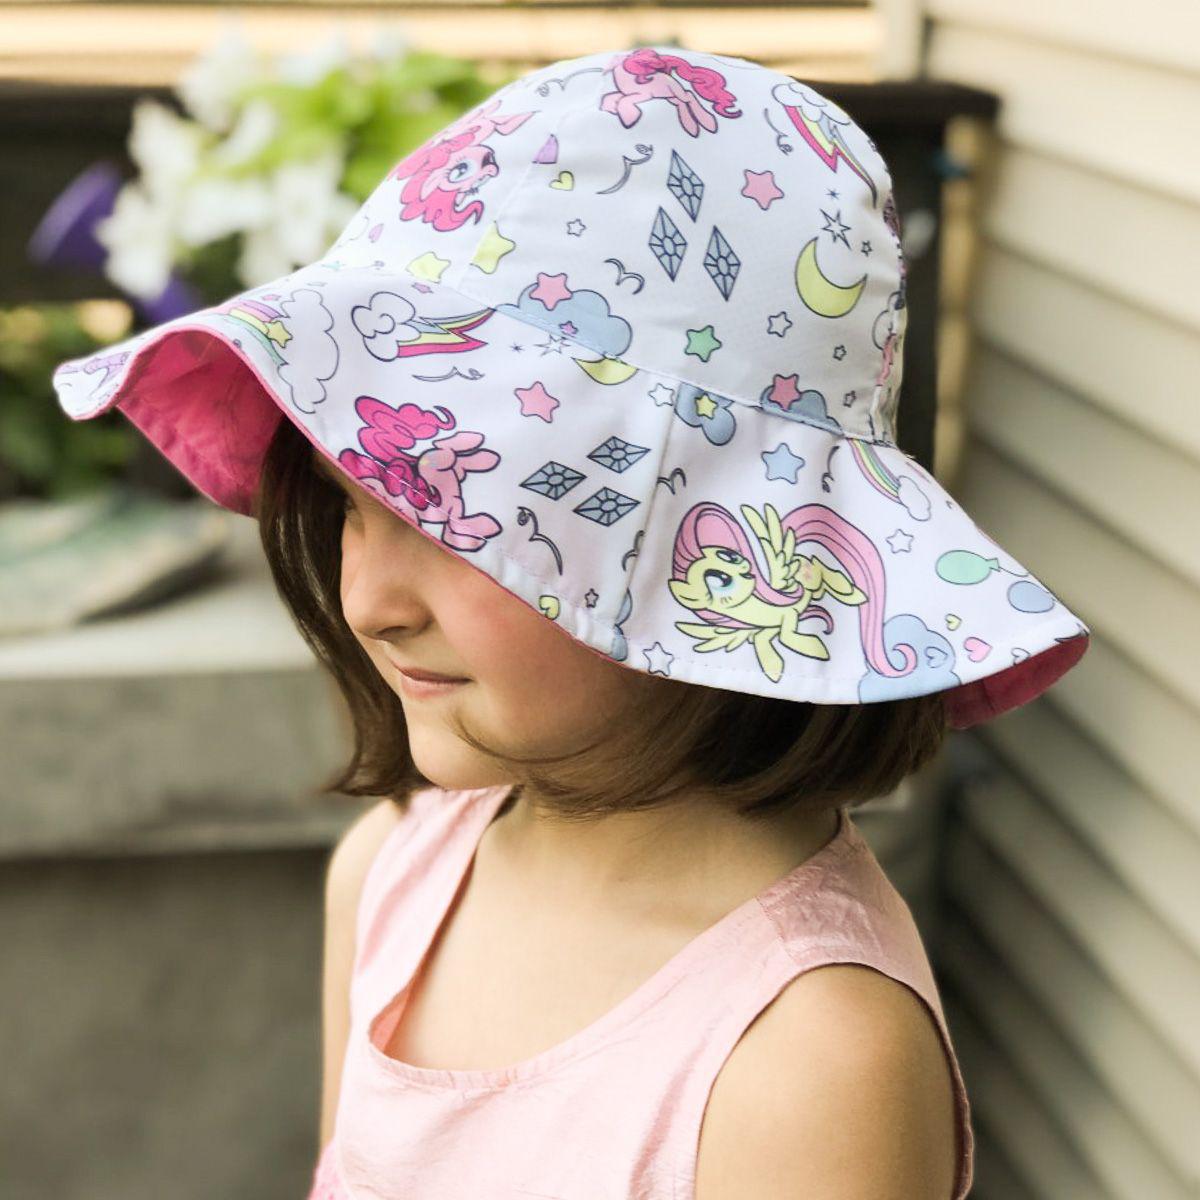 Paw Patrol, My Little Pony, PJ Masks Kids Sun Hat With Fun Characters – UPF 50+ Protection!